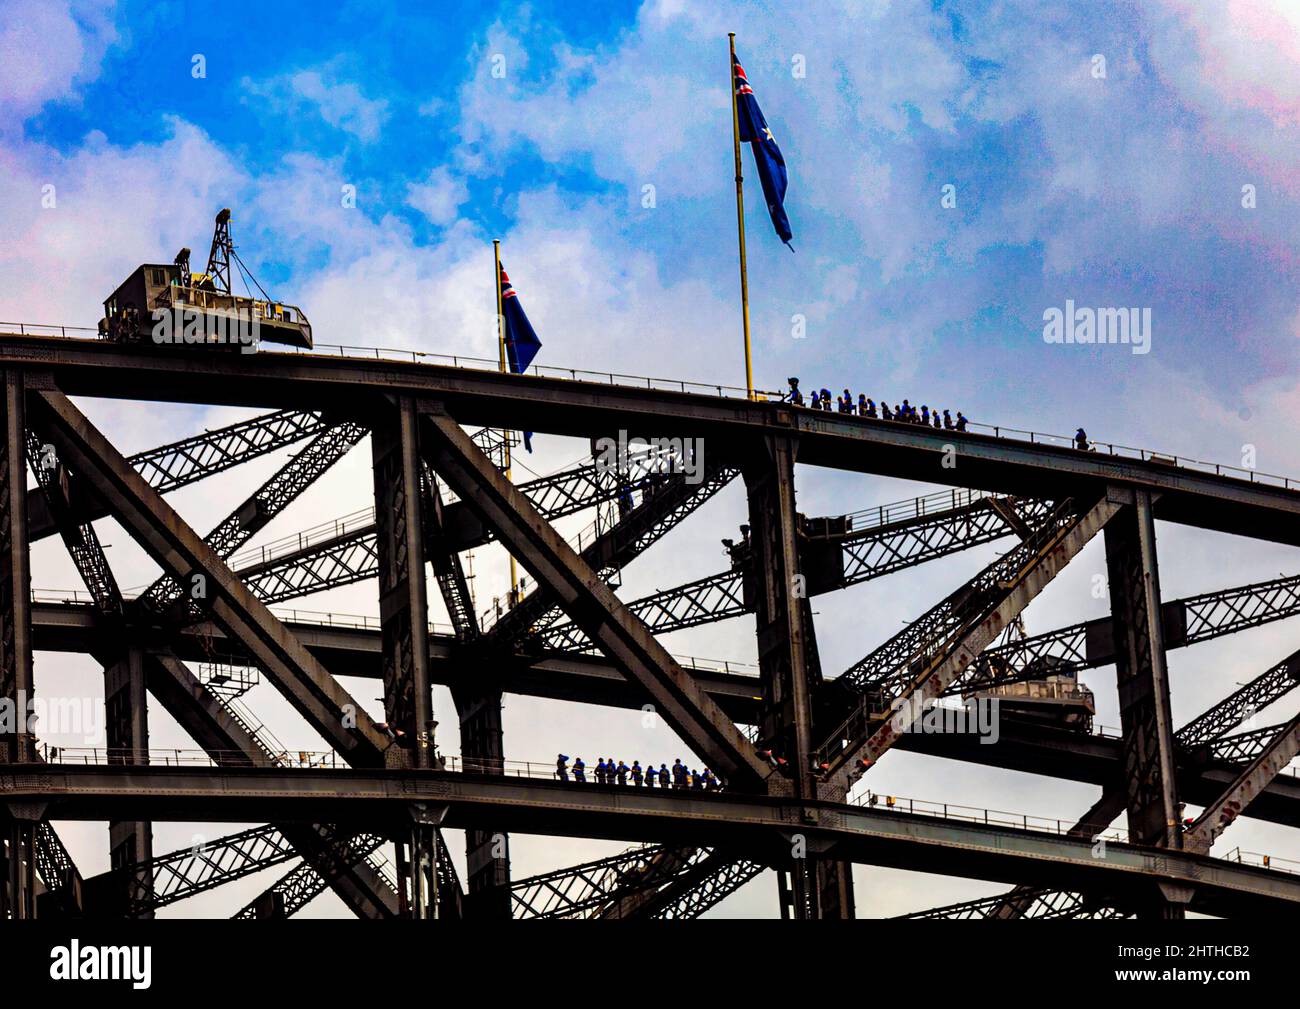 Two groups of tourists at different levels enjoy the climb on Sydney's  heritage-listed steel arch harbour bridge opened to traffic on 19 March 1932 Stock Photo